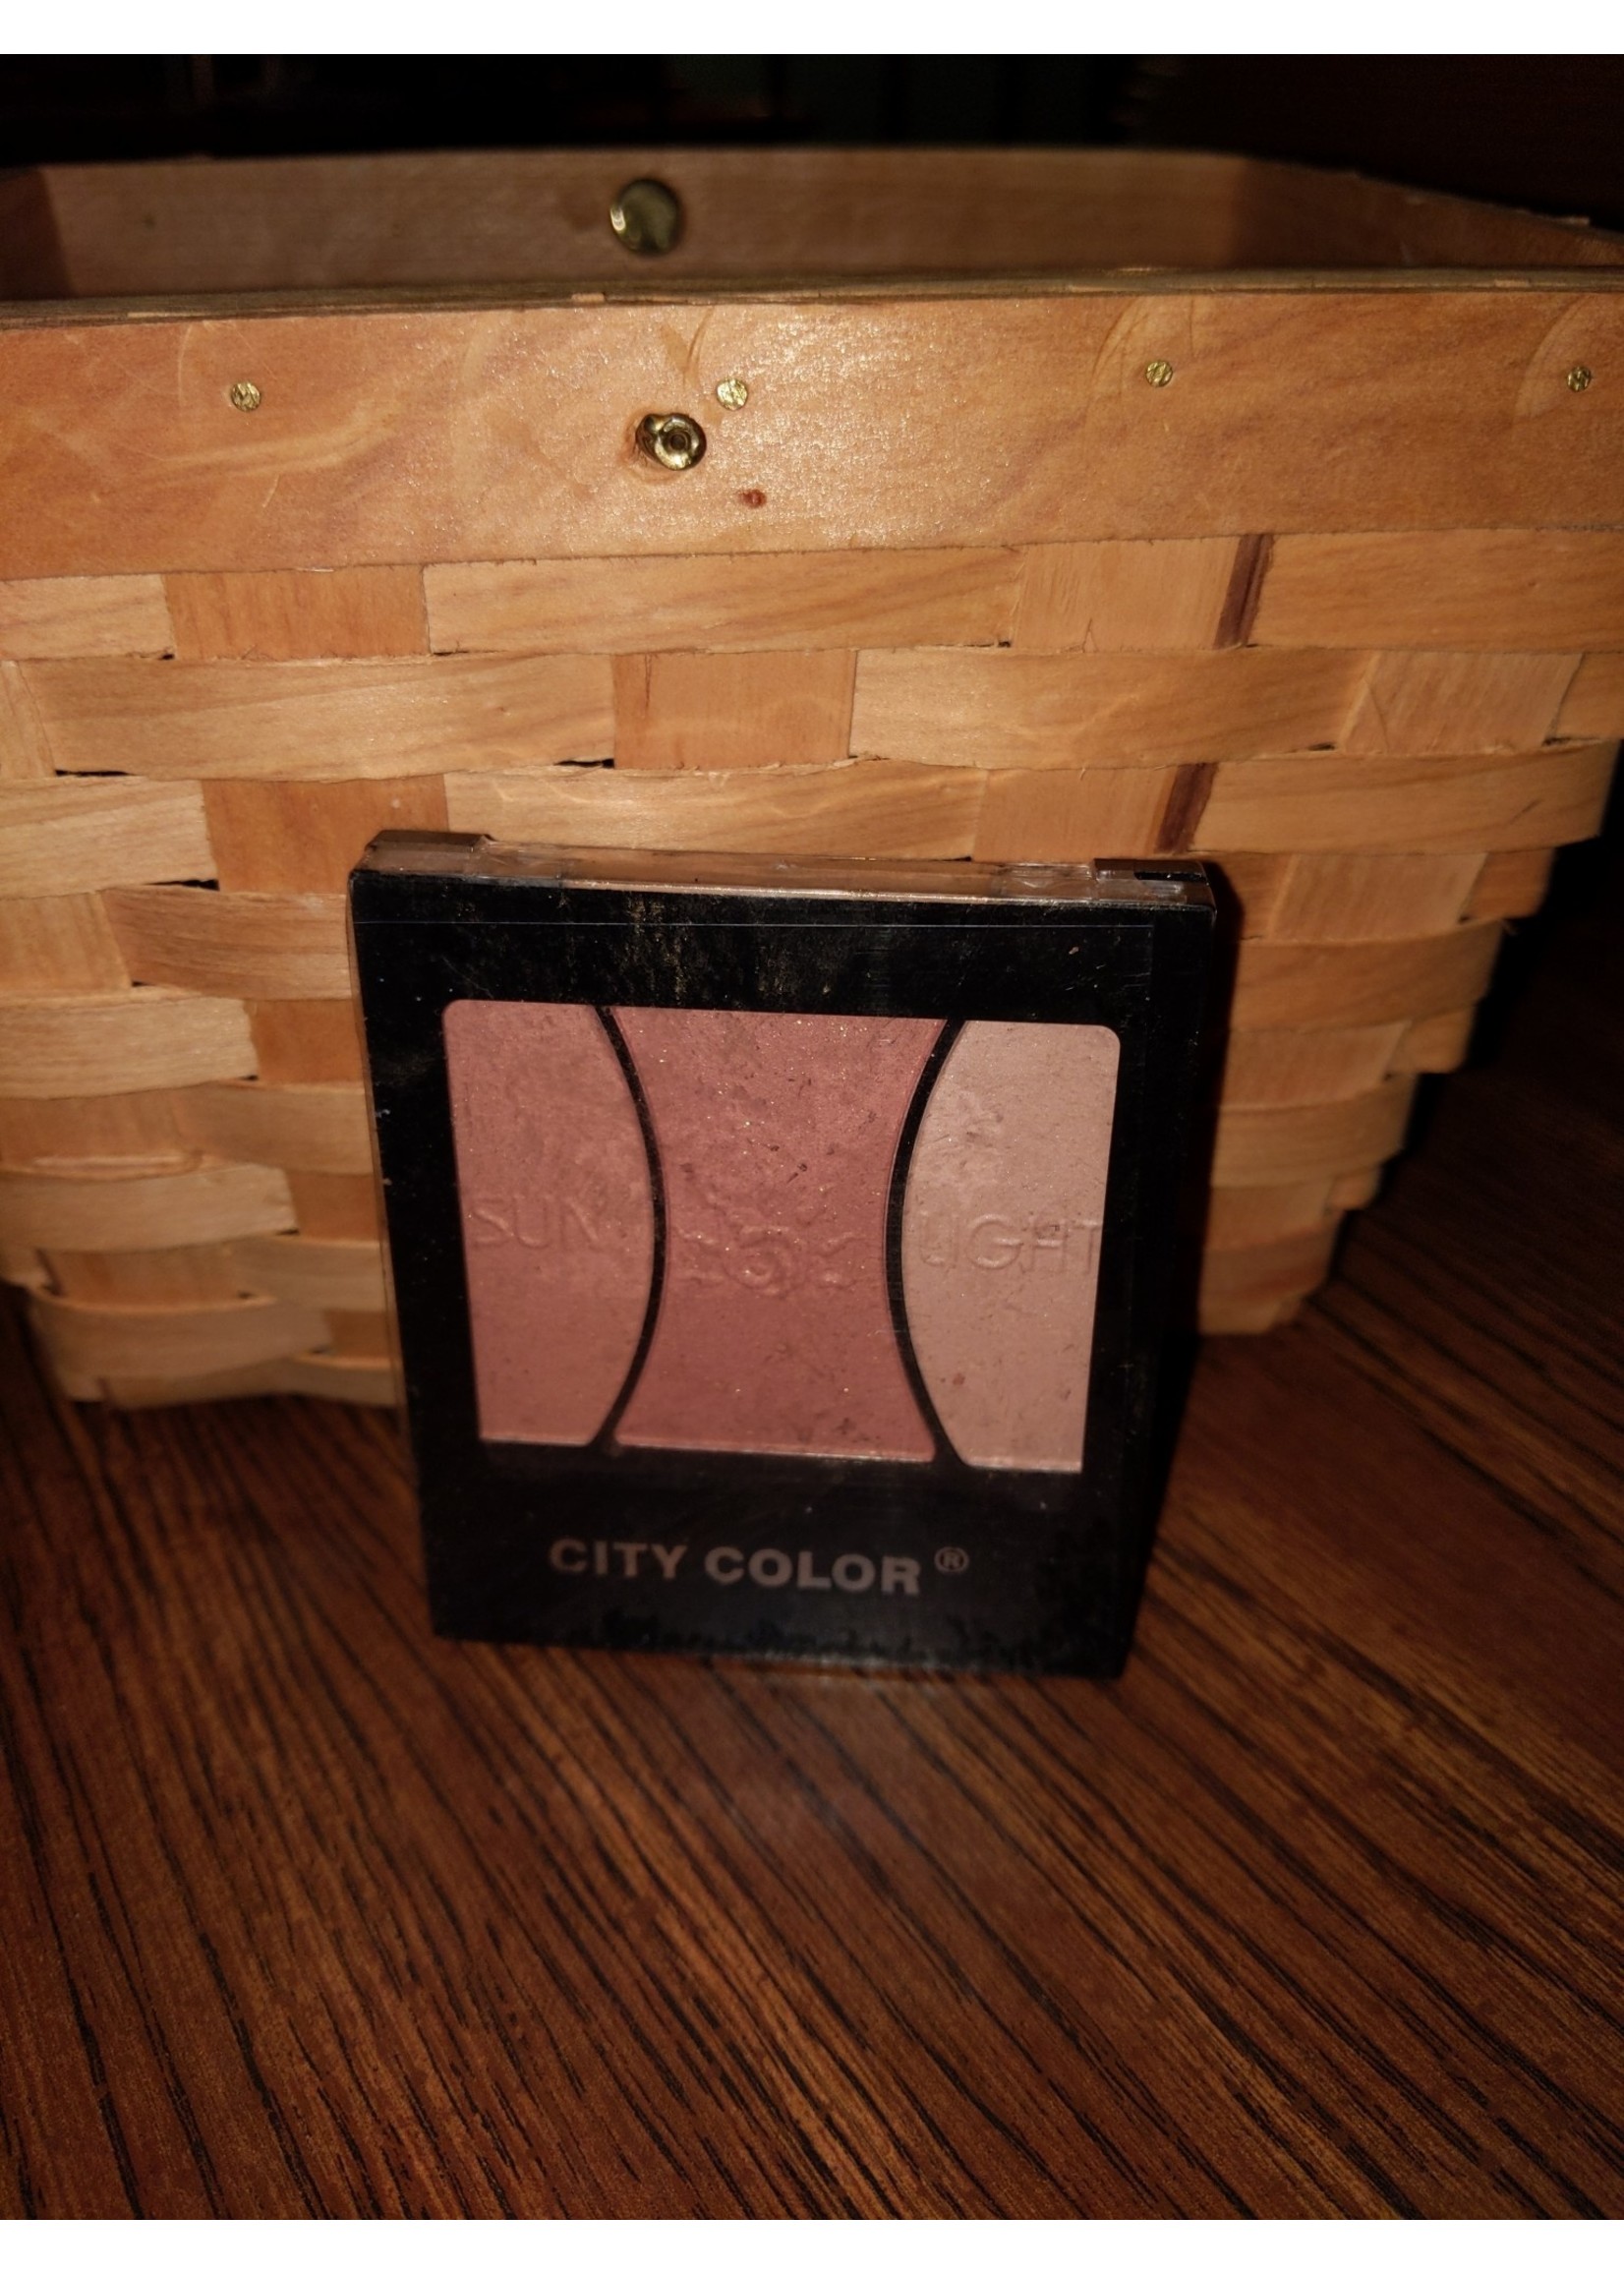 City Color City Color Sunlight Trio All In One Palette Blush and Bronzer #1